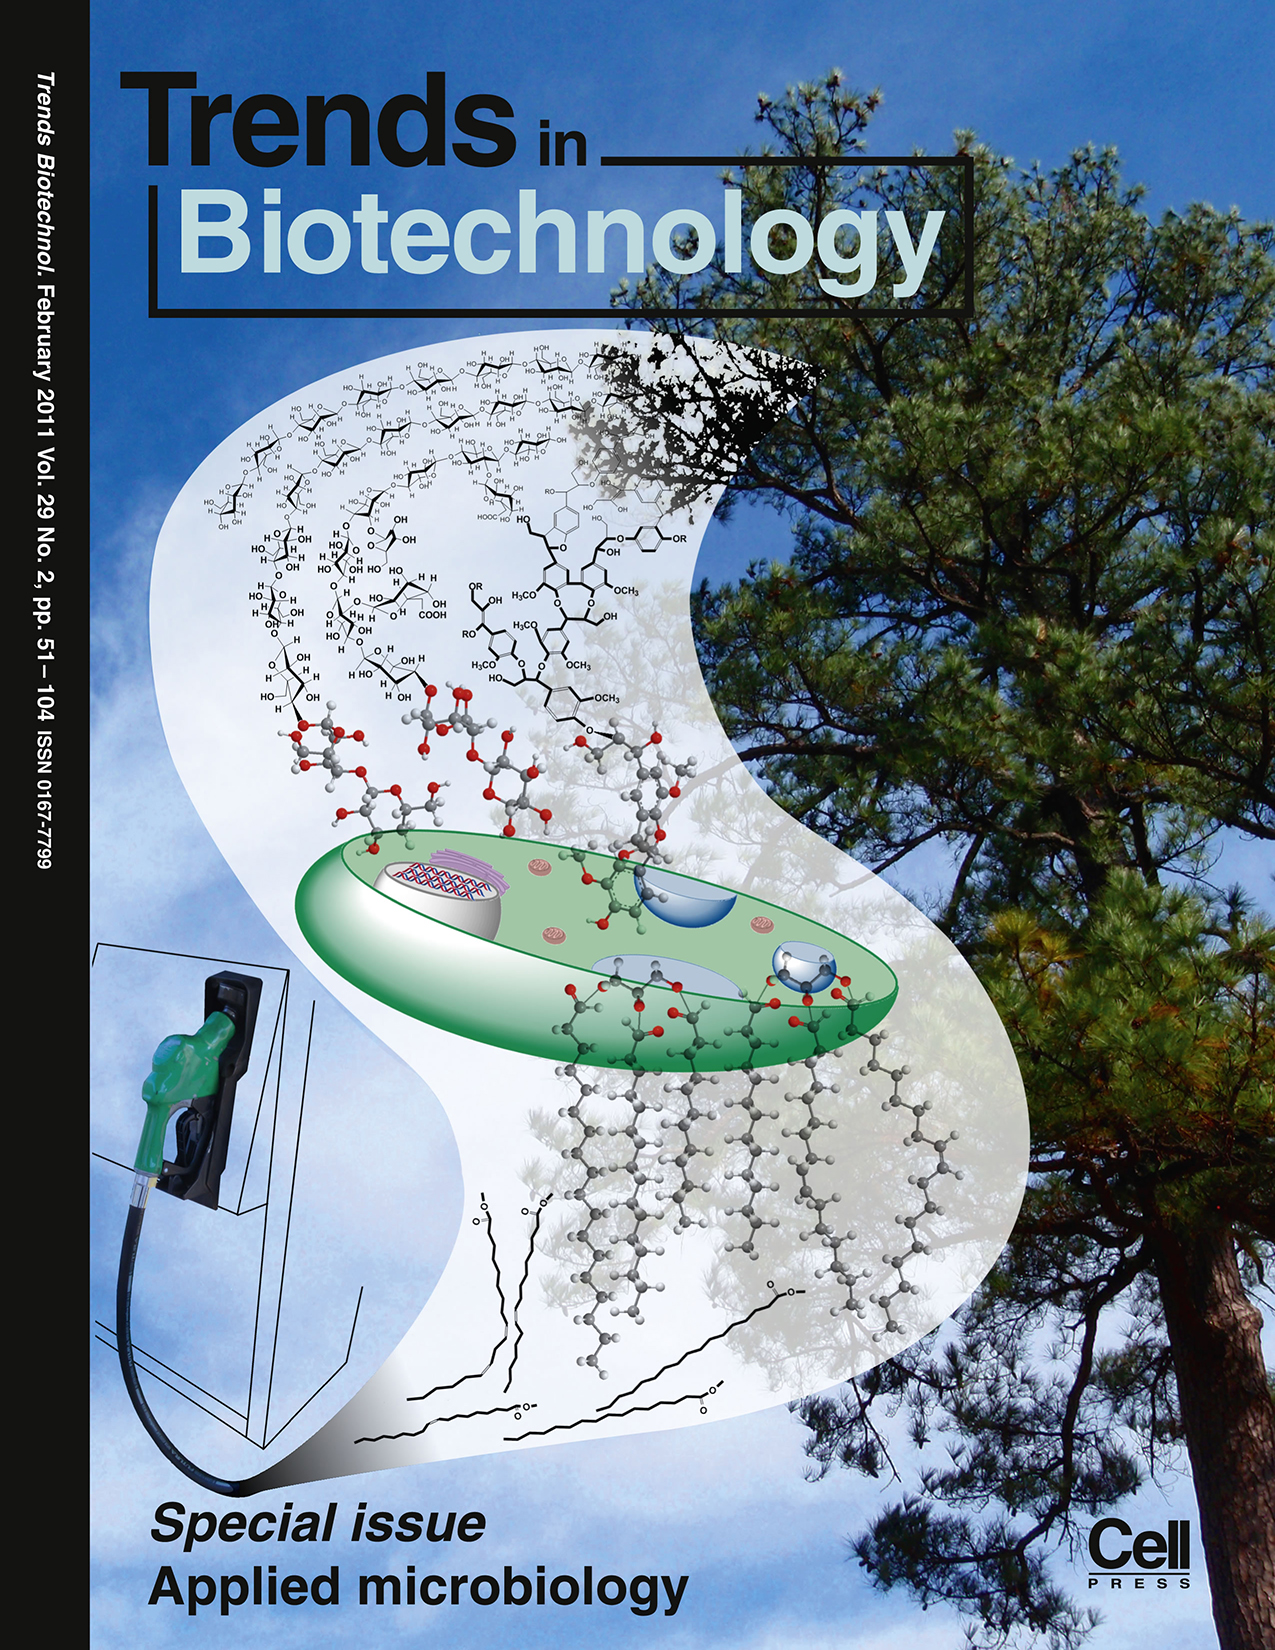 Trends in Biotechnology February 2011 cover.